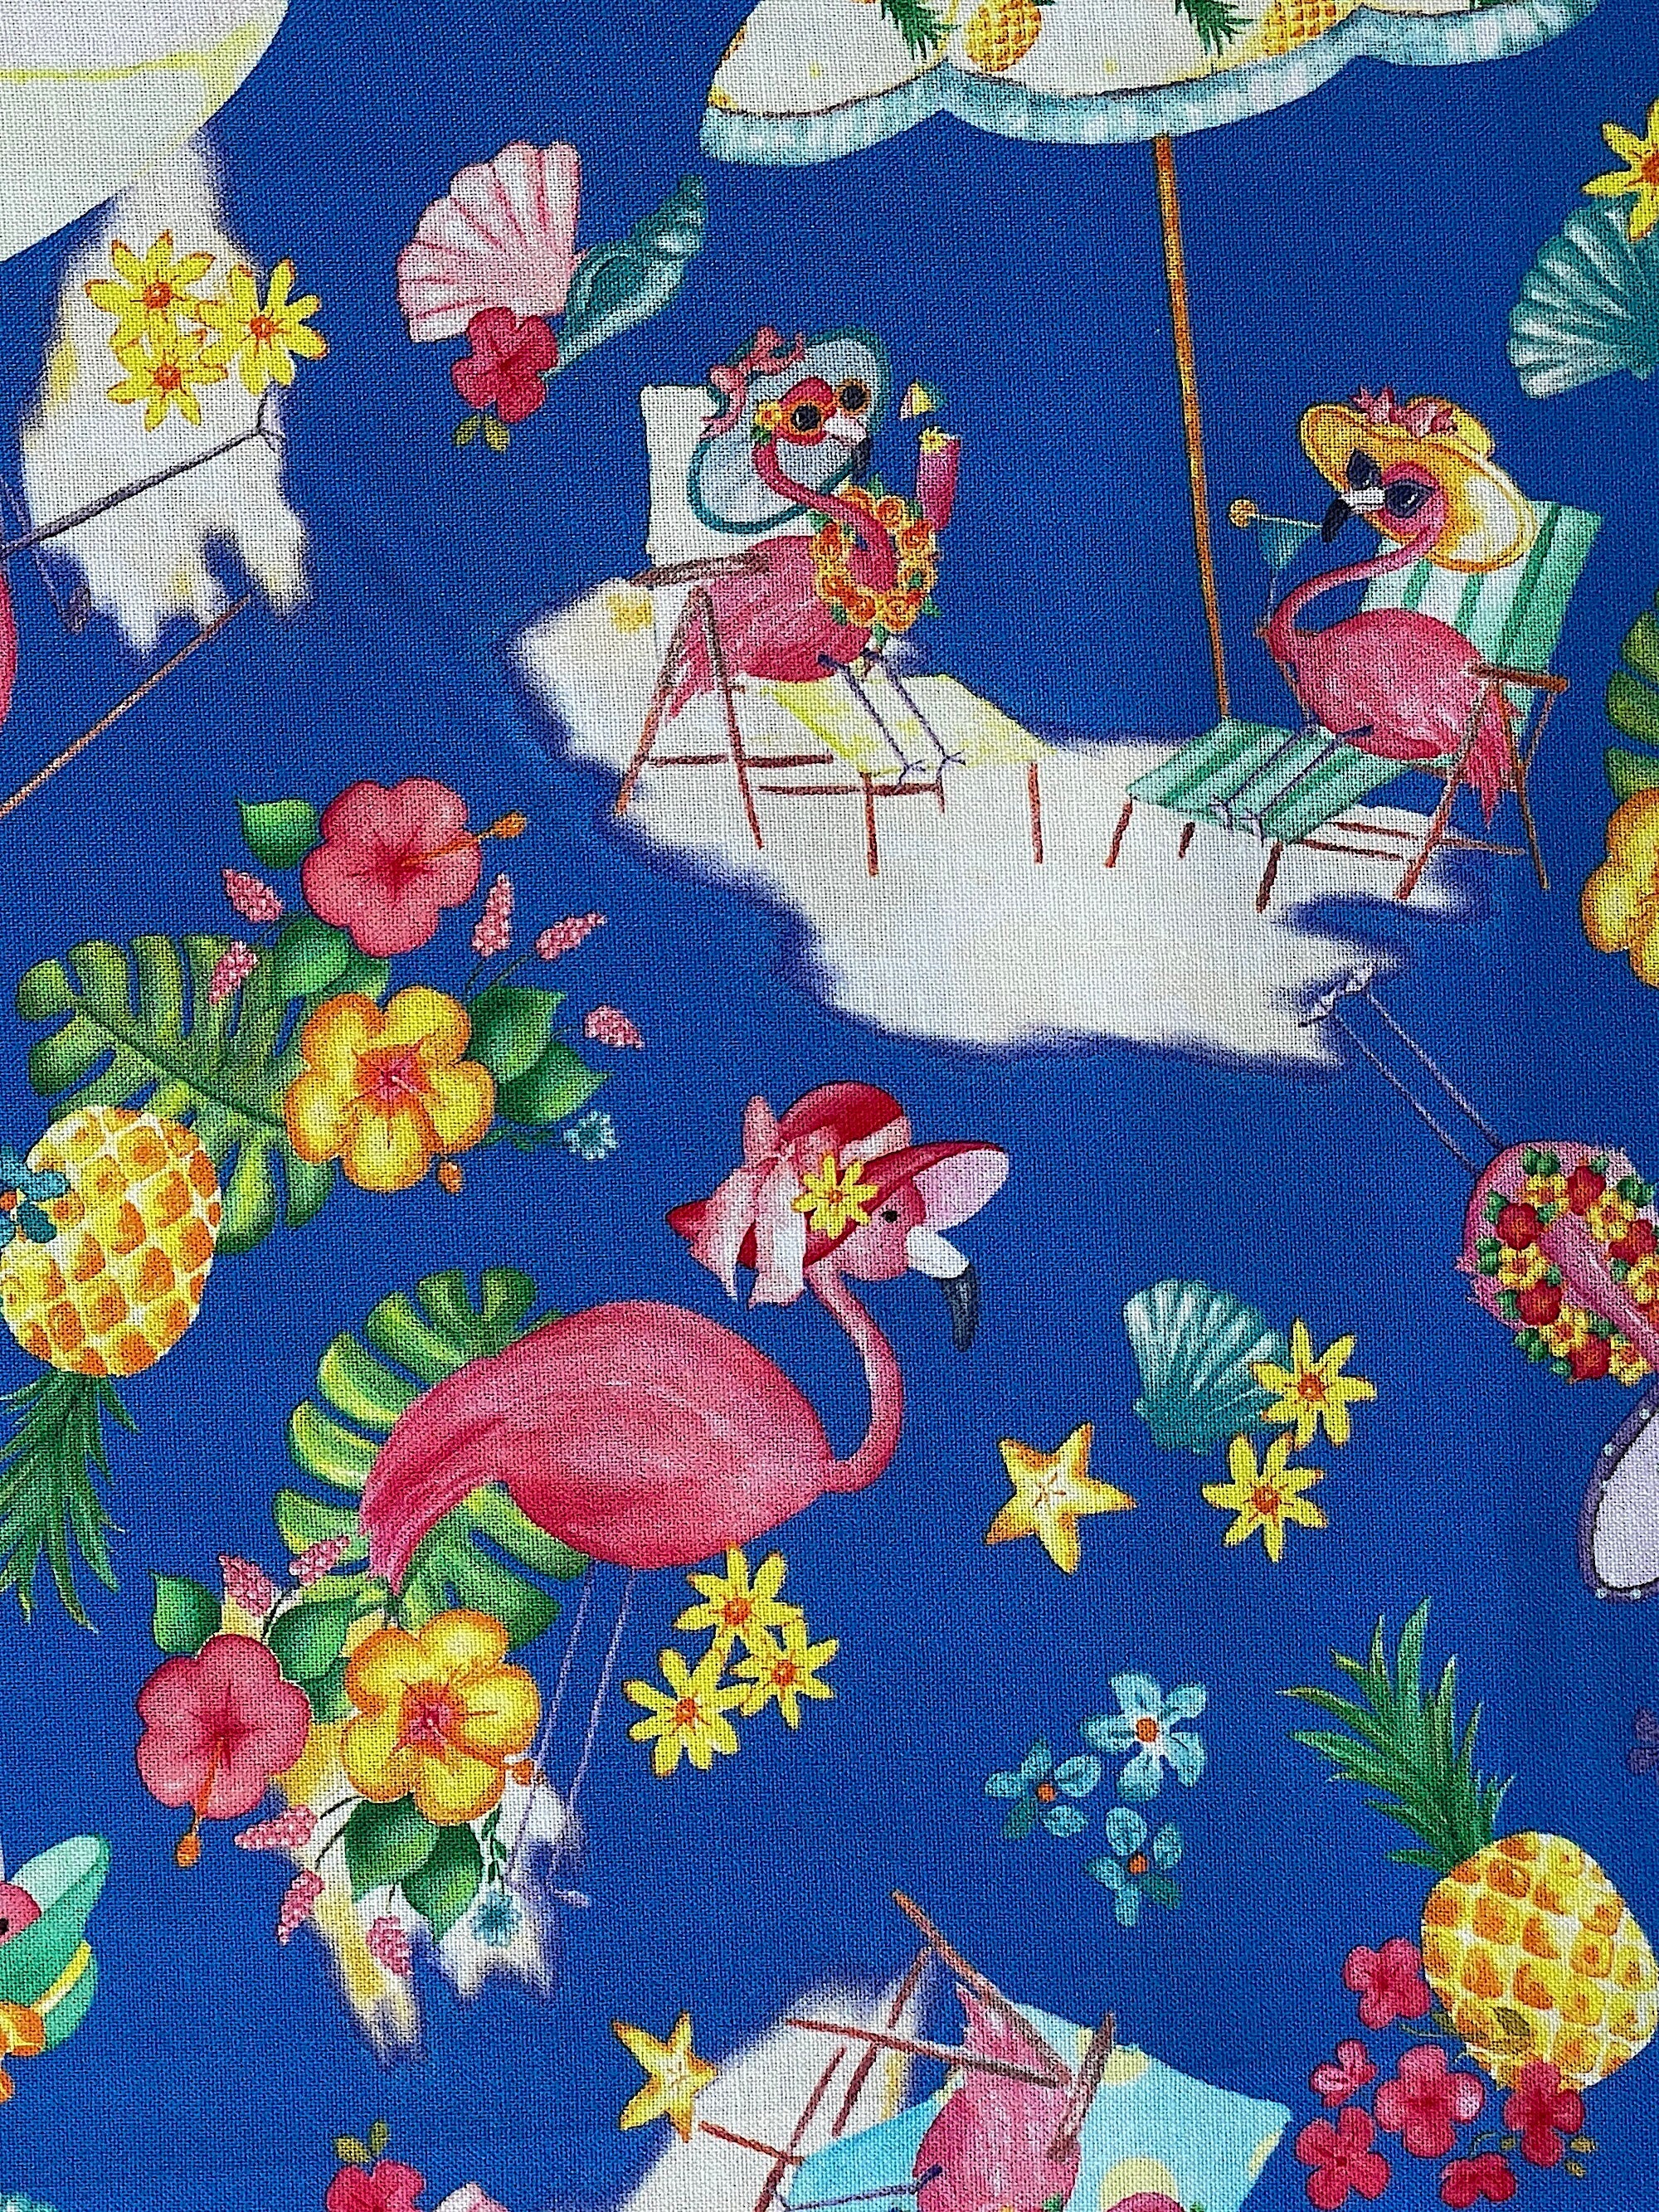 Close up of flamingoes, flowers and more.